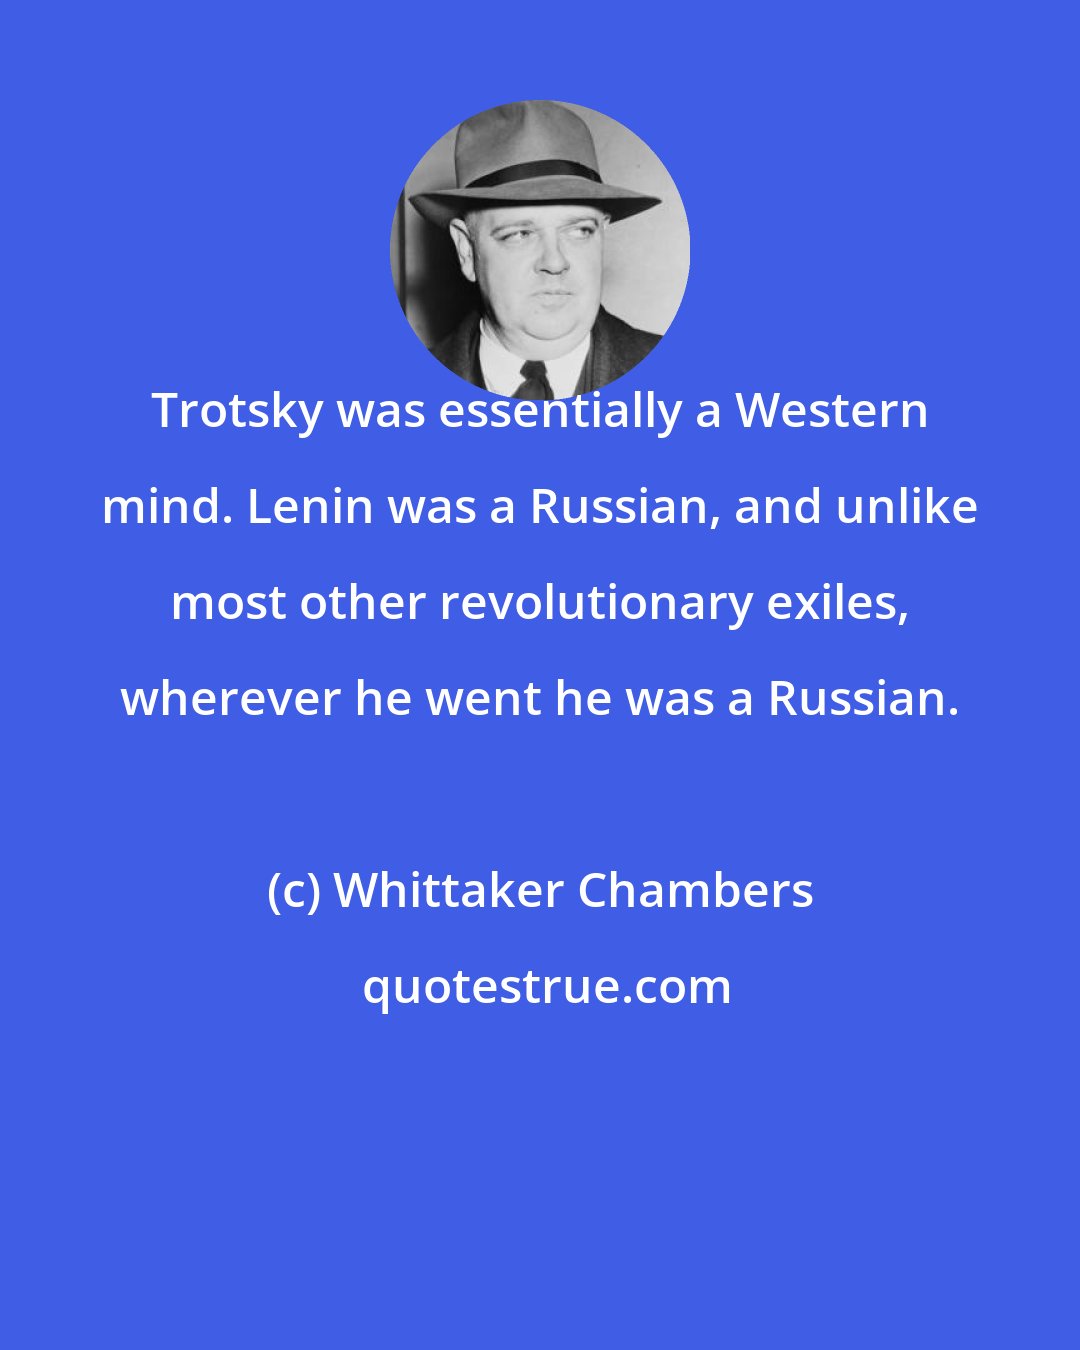 Whittaker Chambers: Trotsky was essentially a Western mind. Lenin was a Russian, and unlike most other revolutionary exiles, wherever he went he was a Russian.